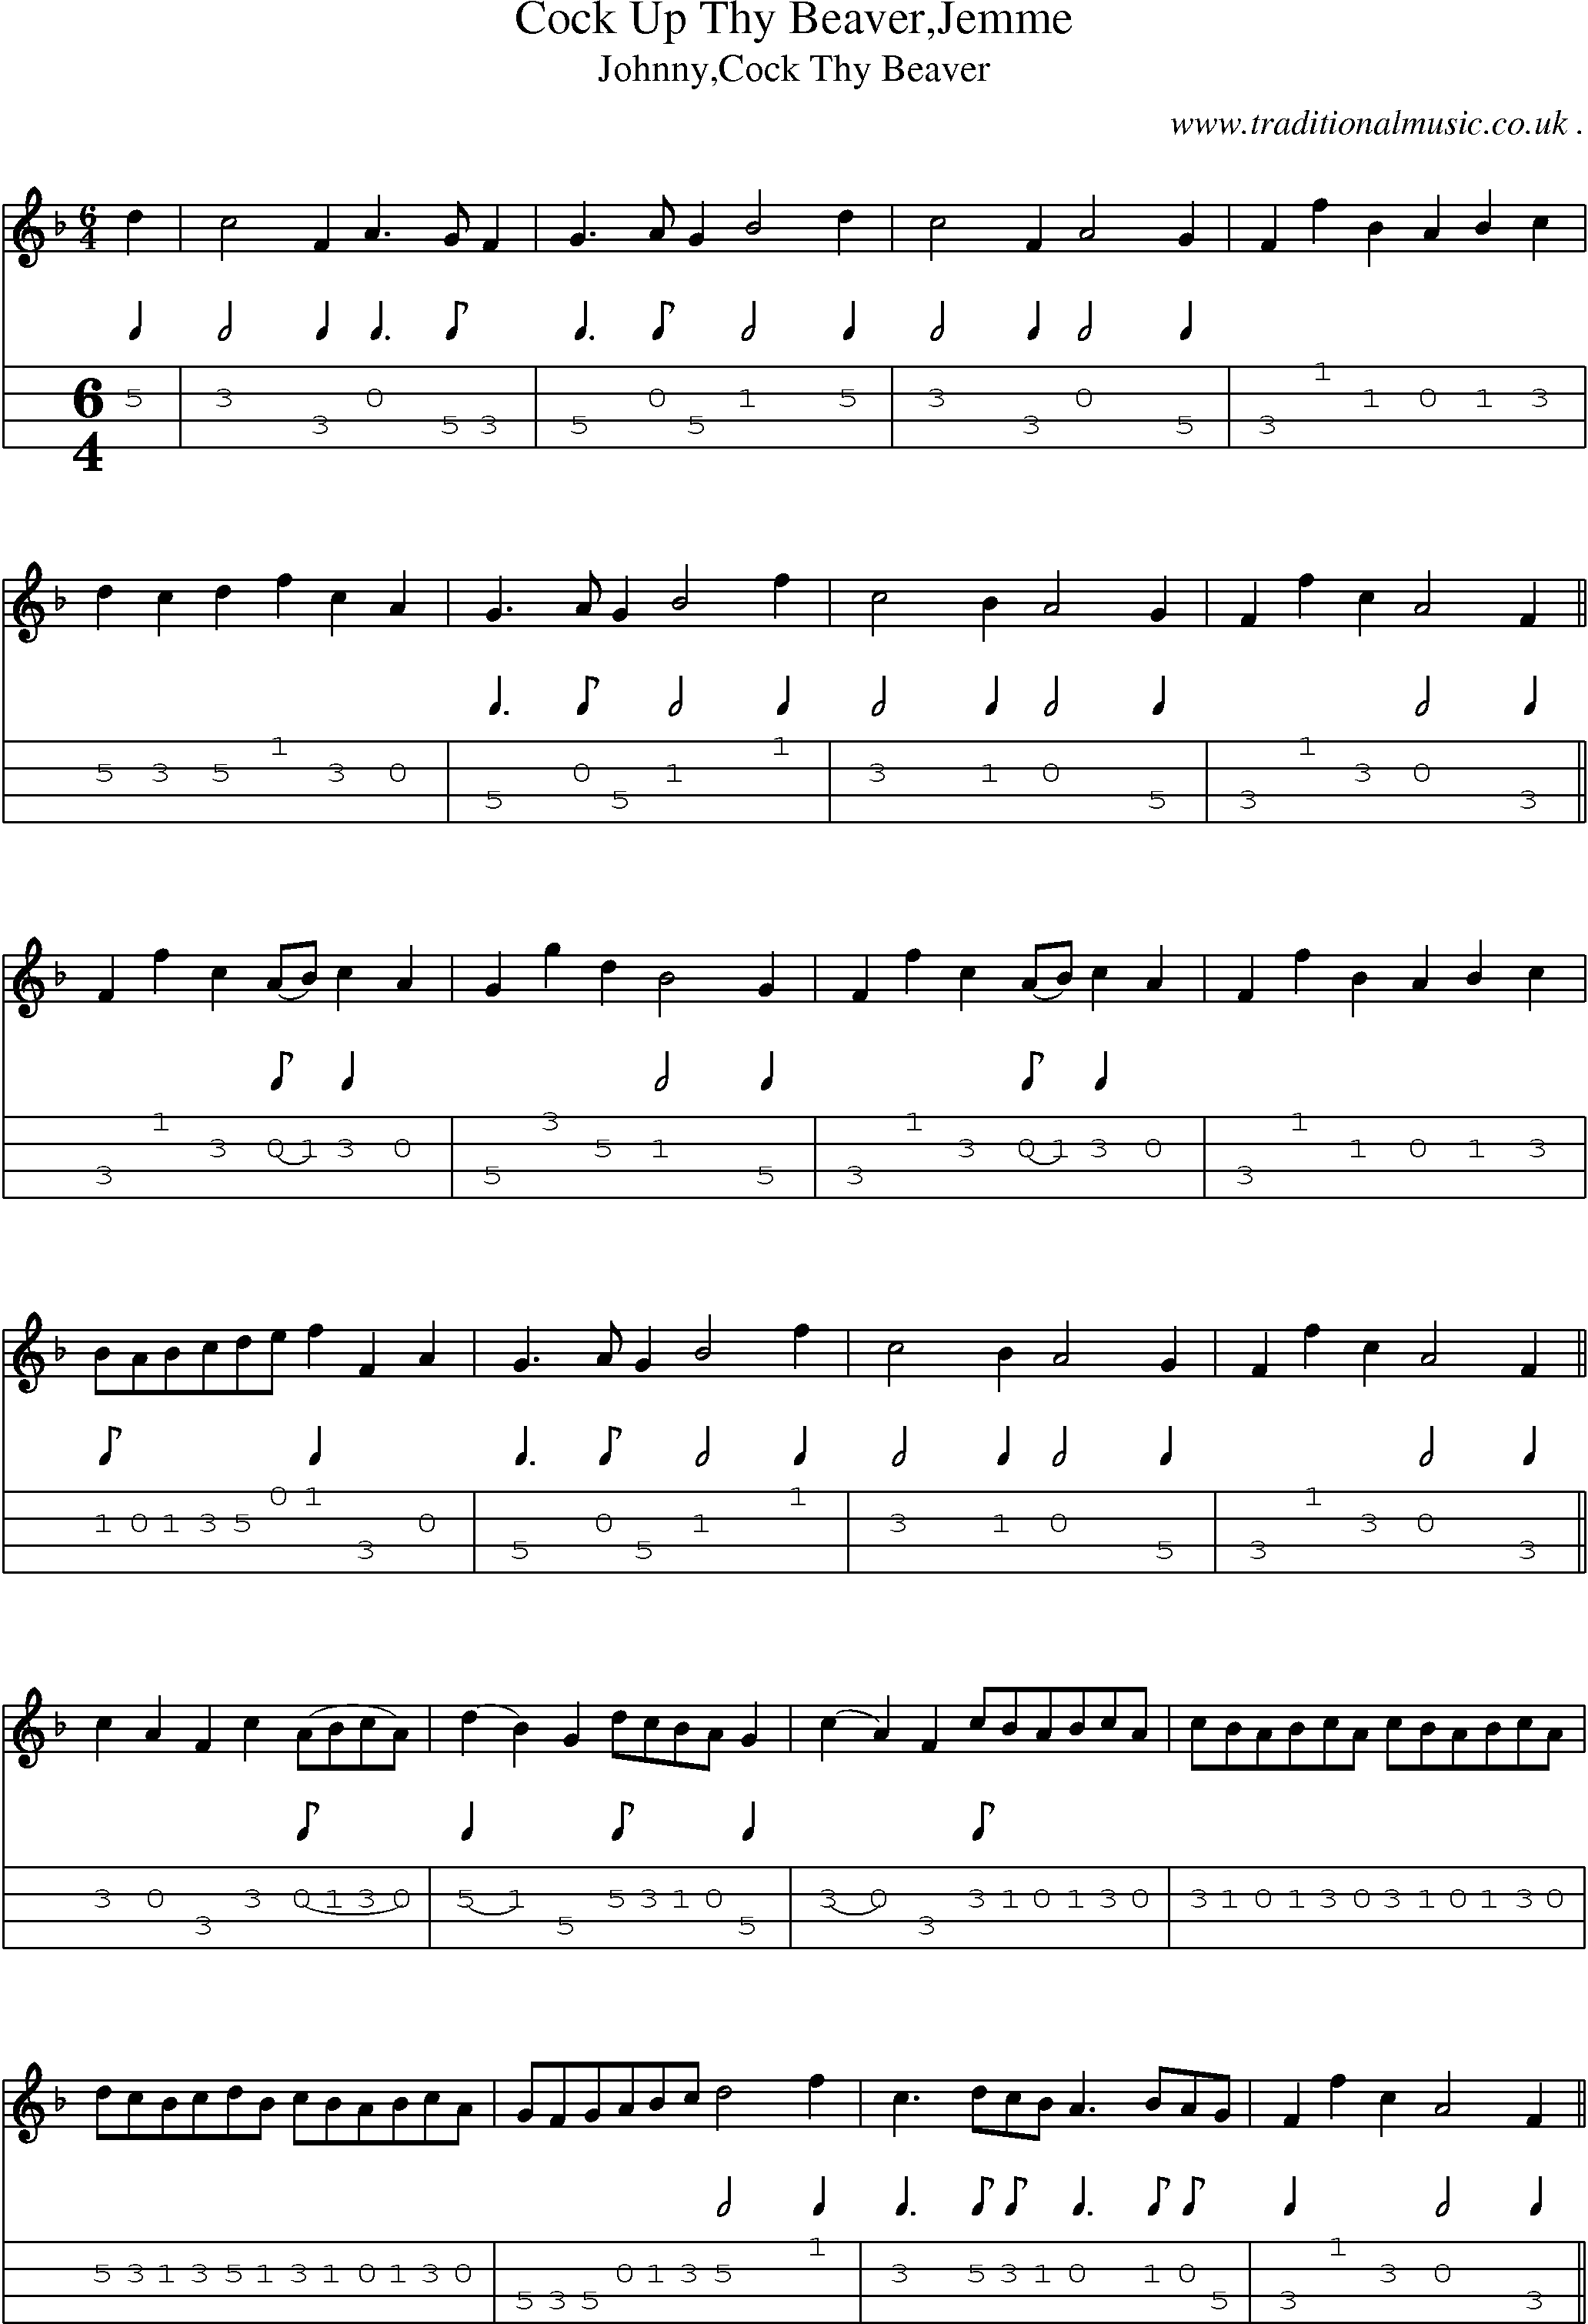 Sheet-Music and Mandolin Tabs for Cock Up Thy Beaverjemme